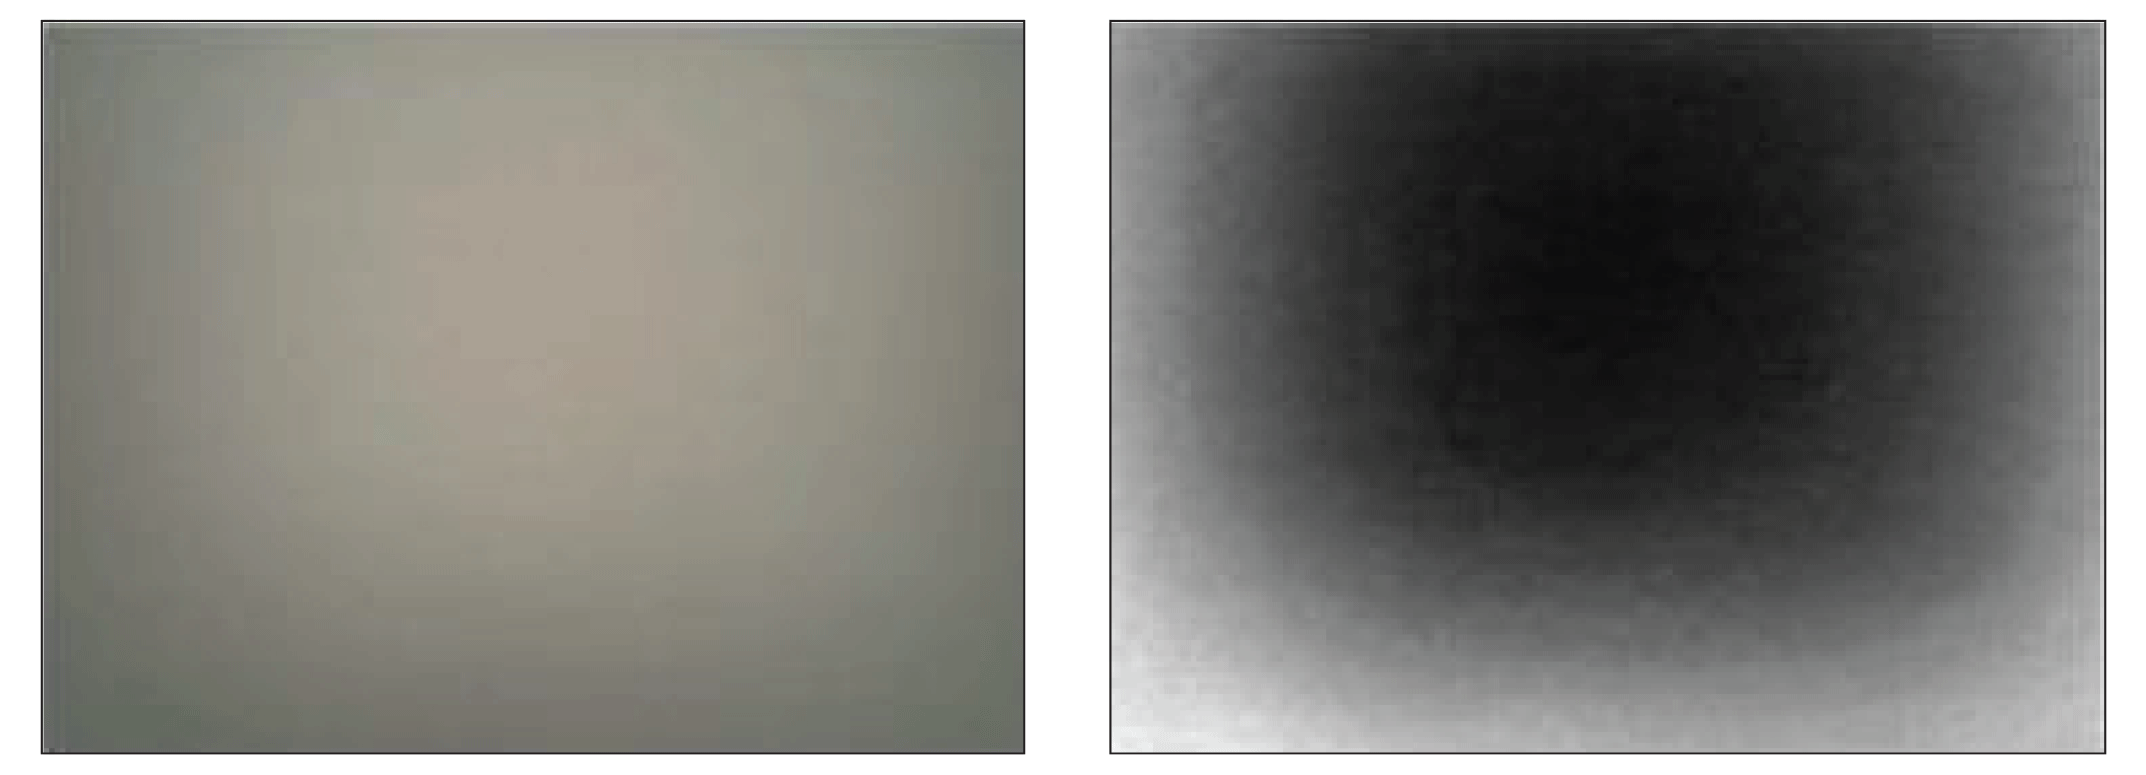 Images of the vignetting effect and its correction factor, which makes the image sharper
                           and gives it more contrast.